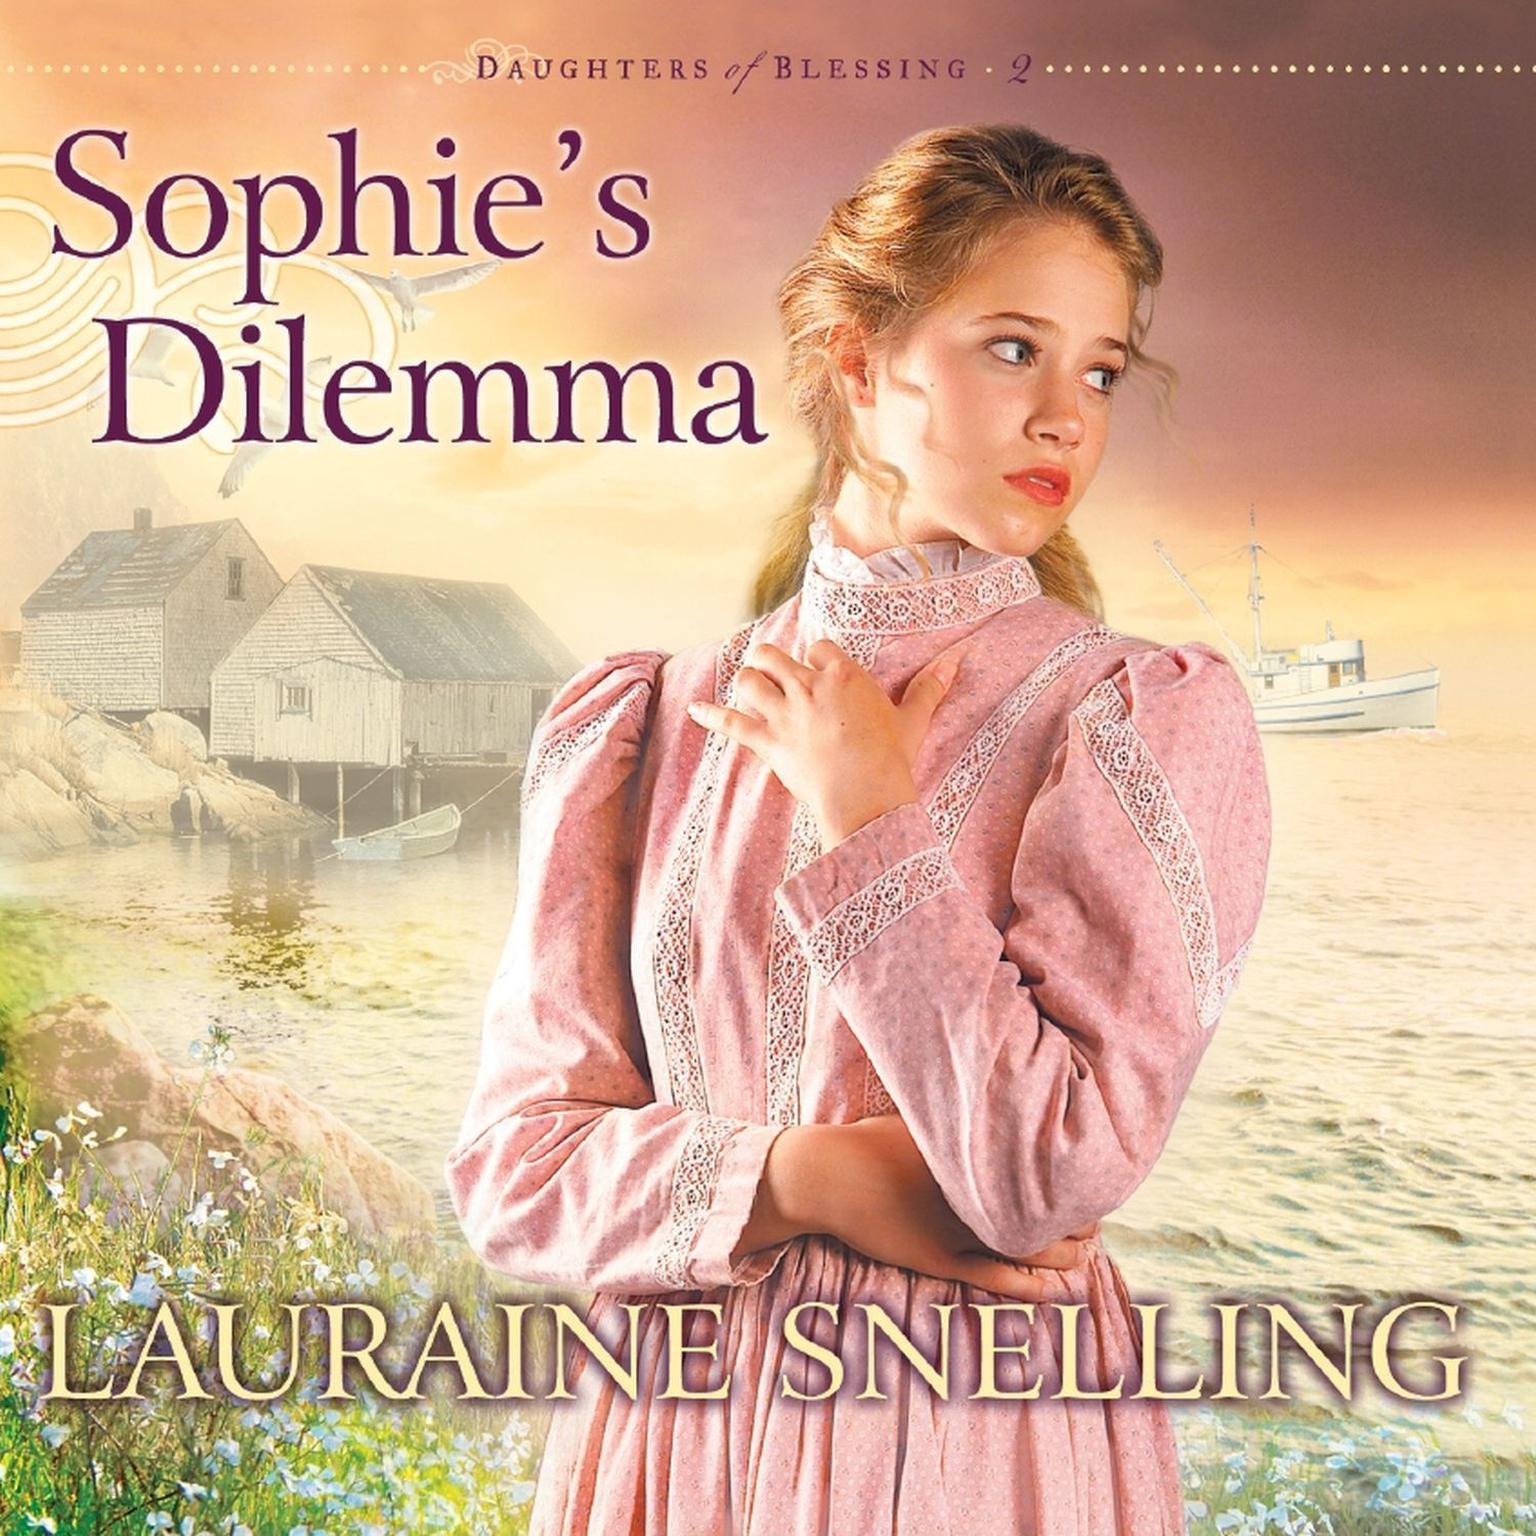 Sophies Dilemma (Abridged) Audiobook, by Lauraine Snelling